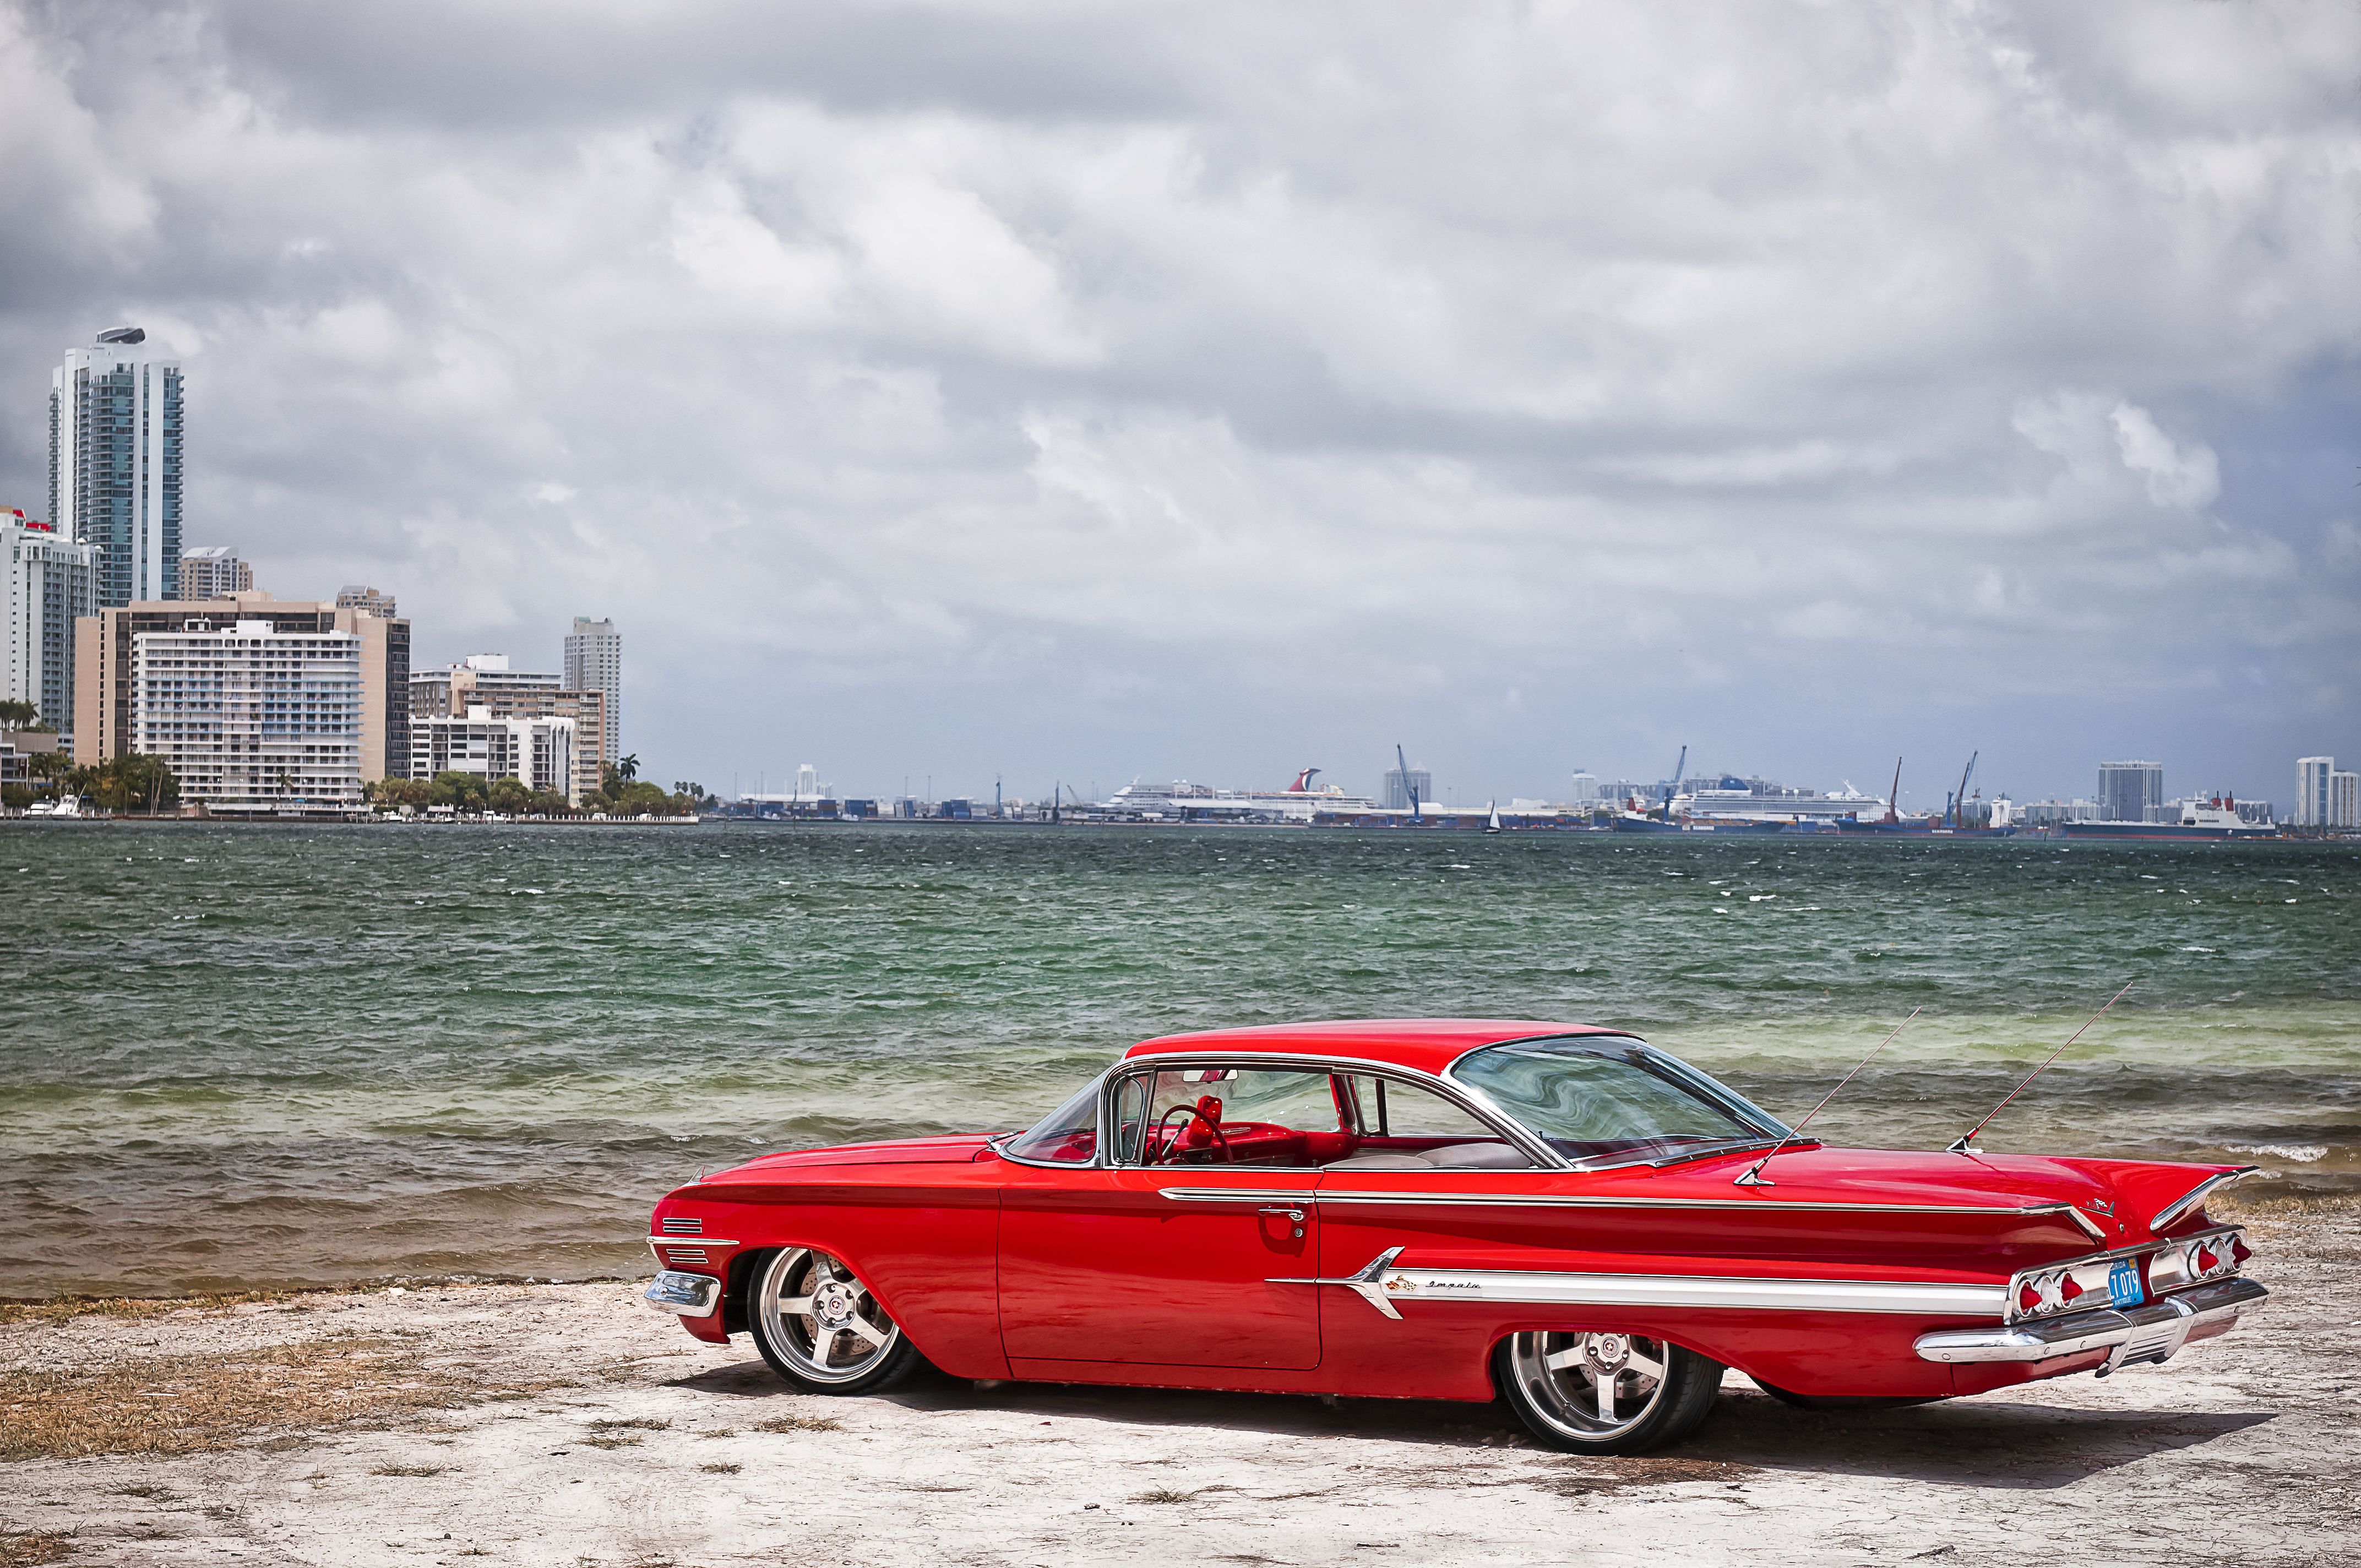 117 Chevrolet Impala HD Wallpapers | Background Images - Wallpaper Abyss